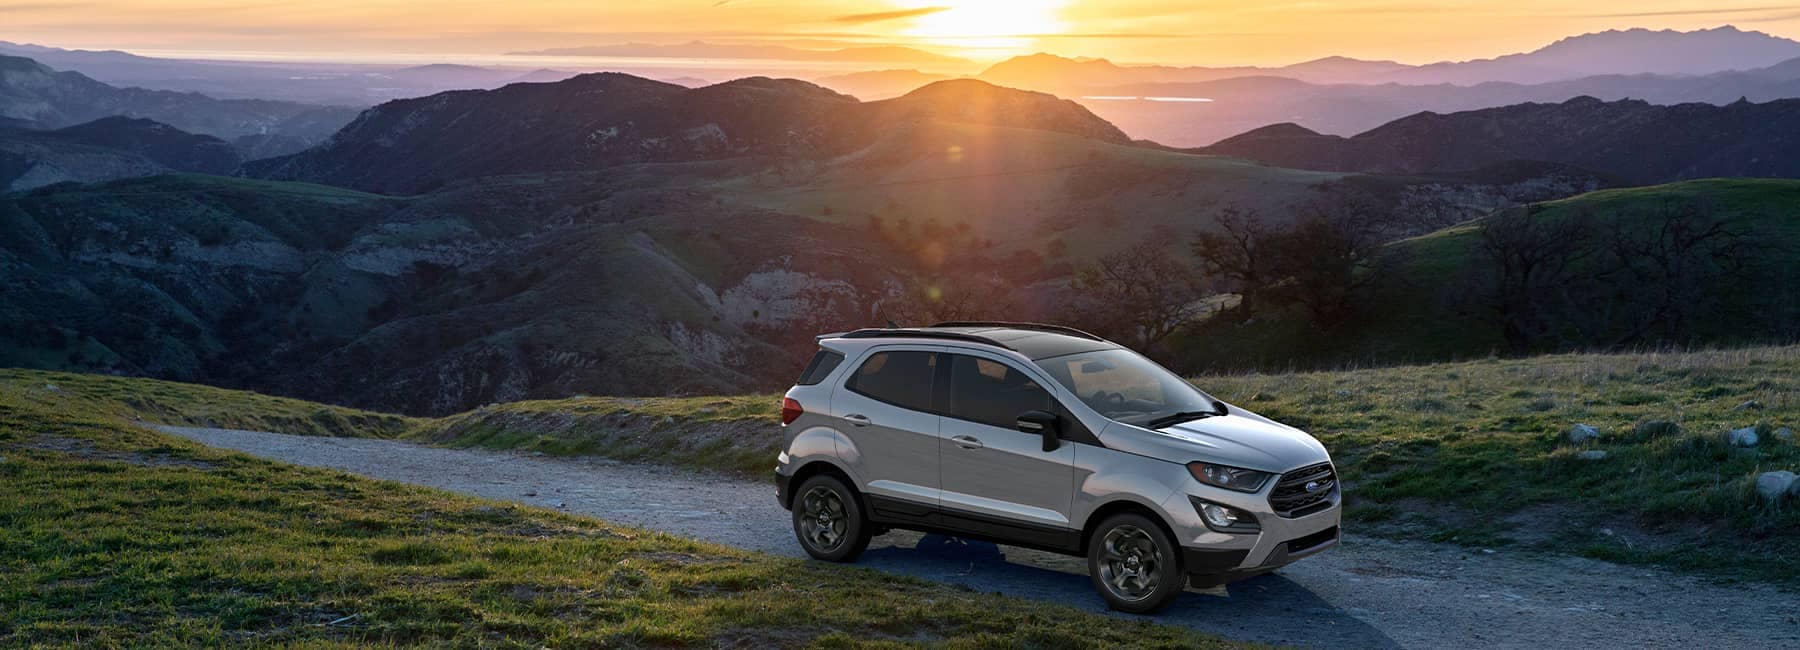 Silver 202a1 Ford EcoSport overlooking the sunset behind a mountain range